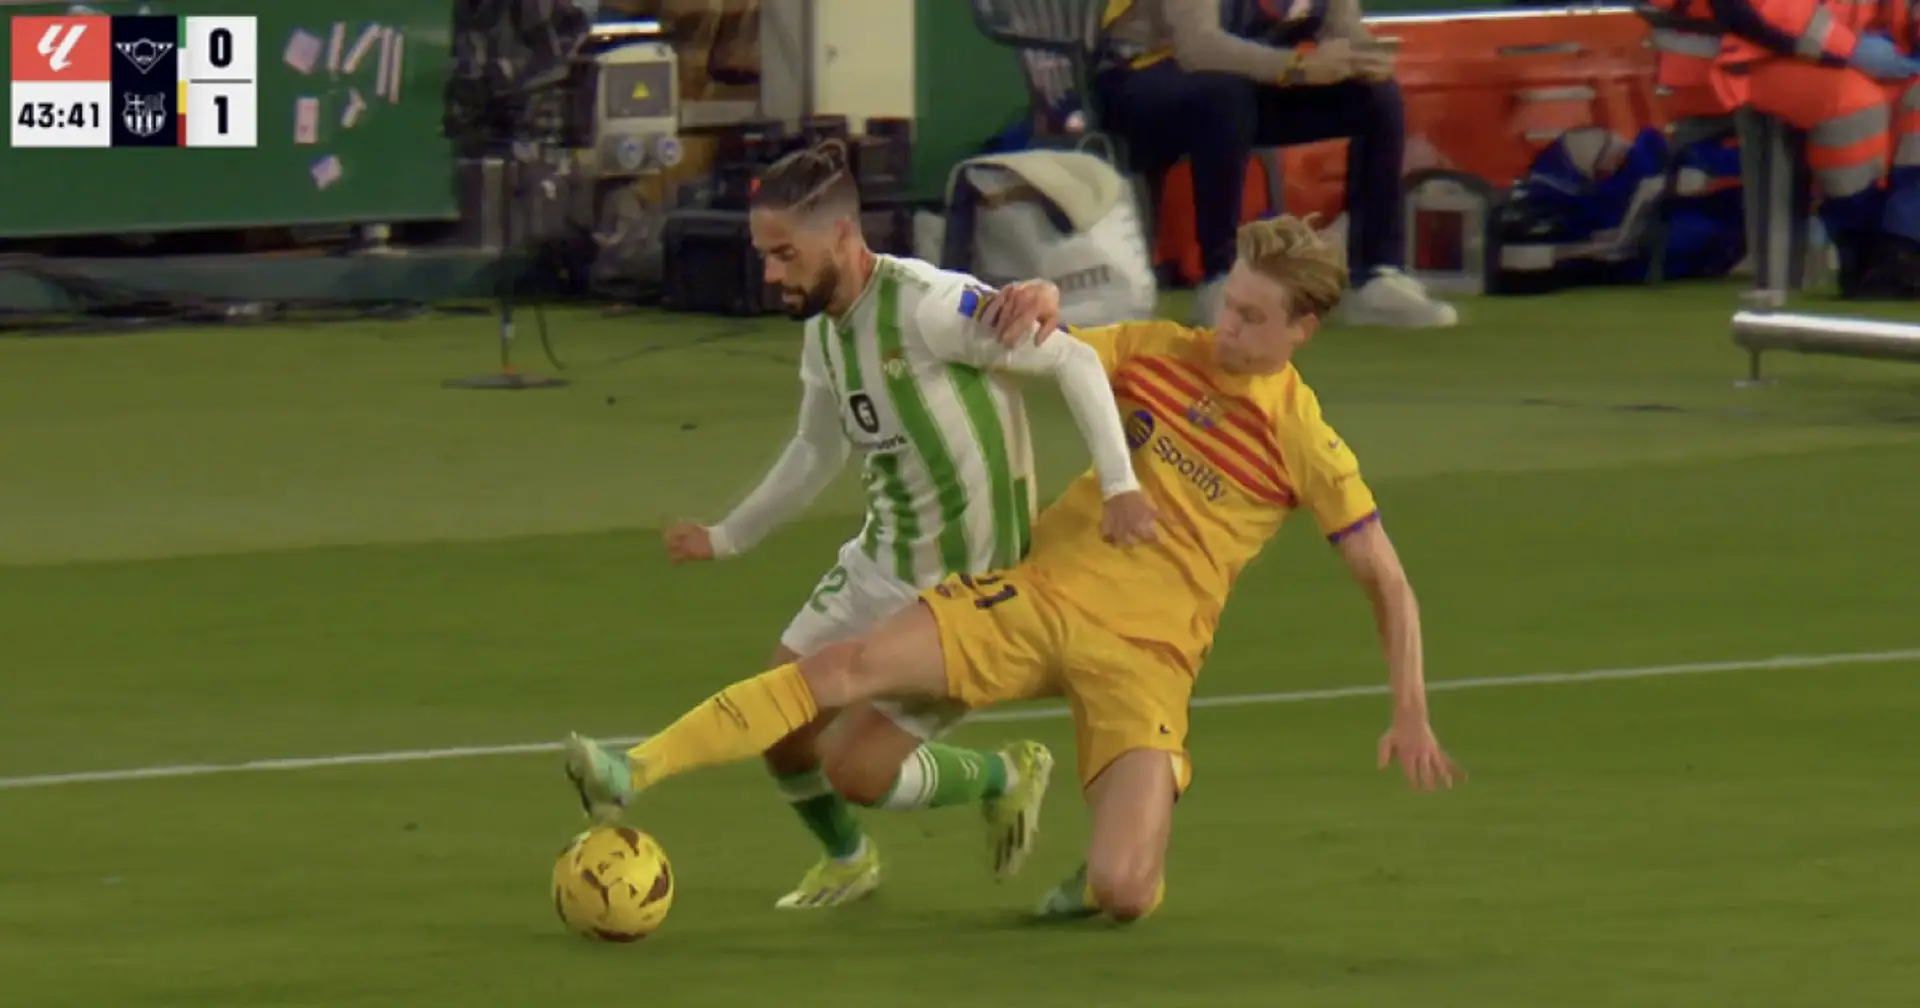 Frenkie de Jong's spectacular tackle on Isco caught on camera